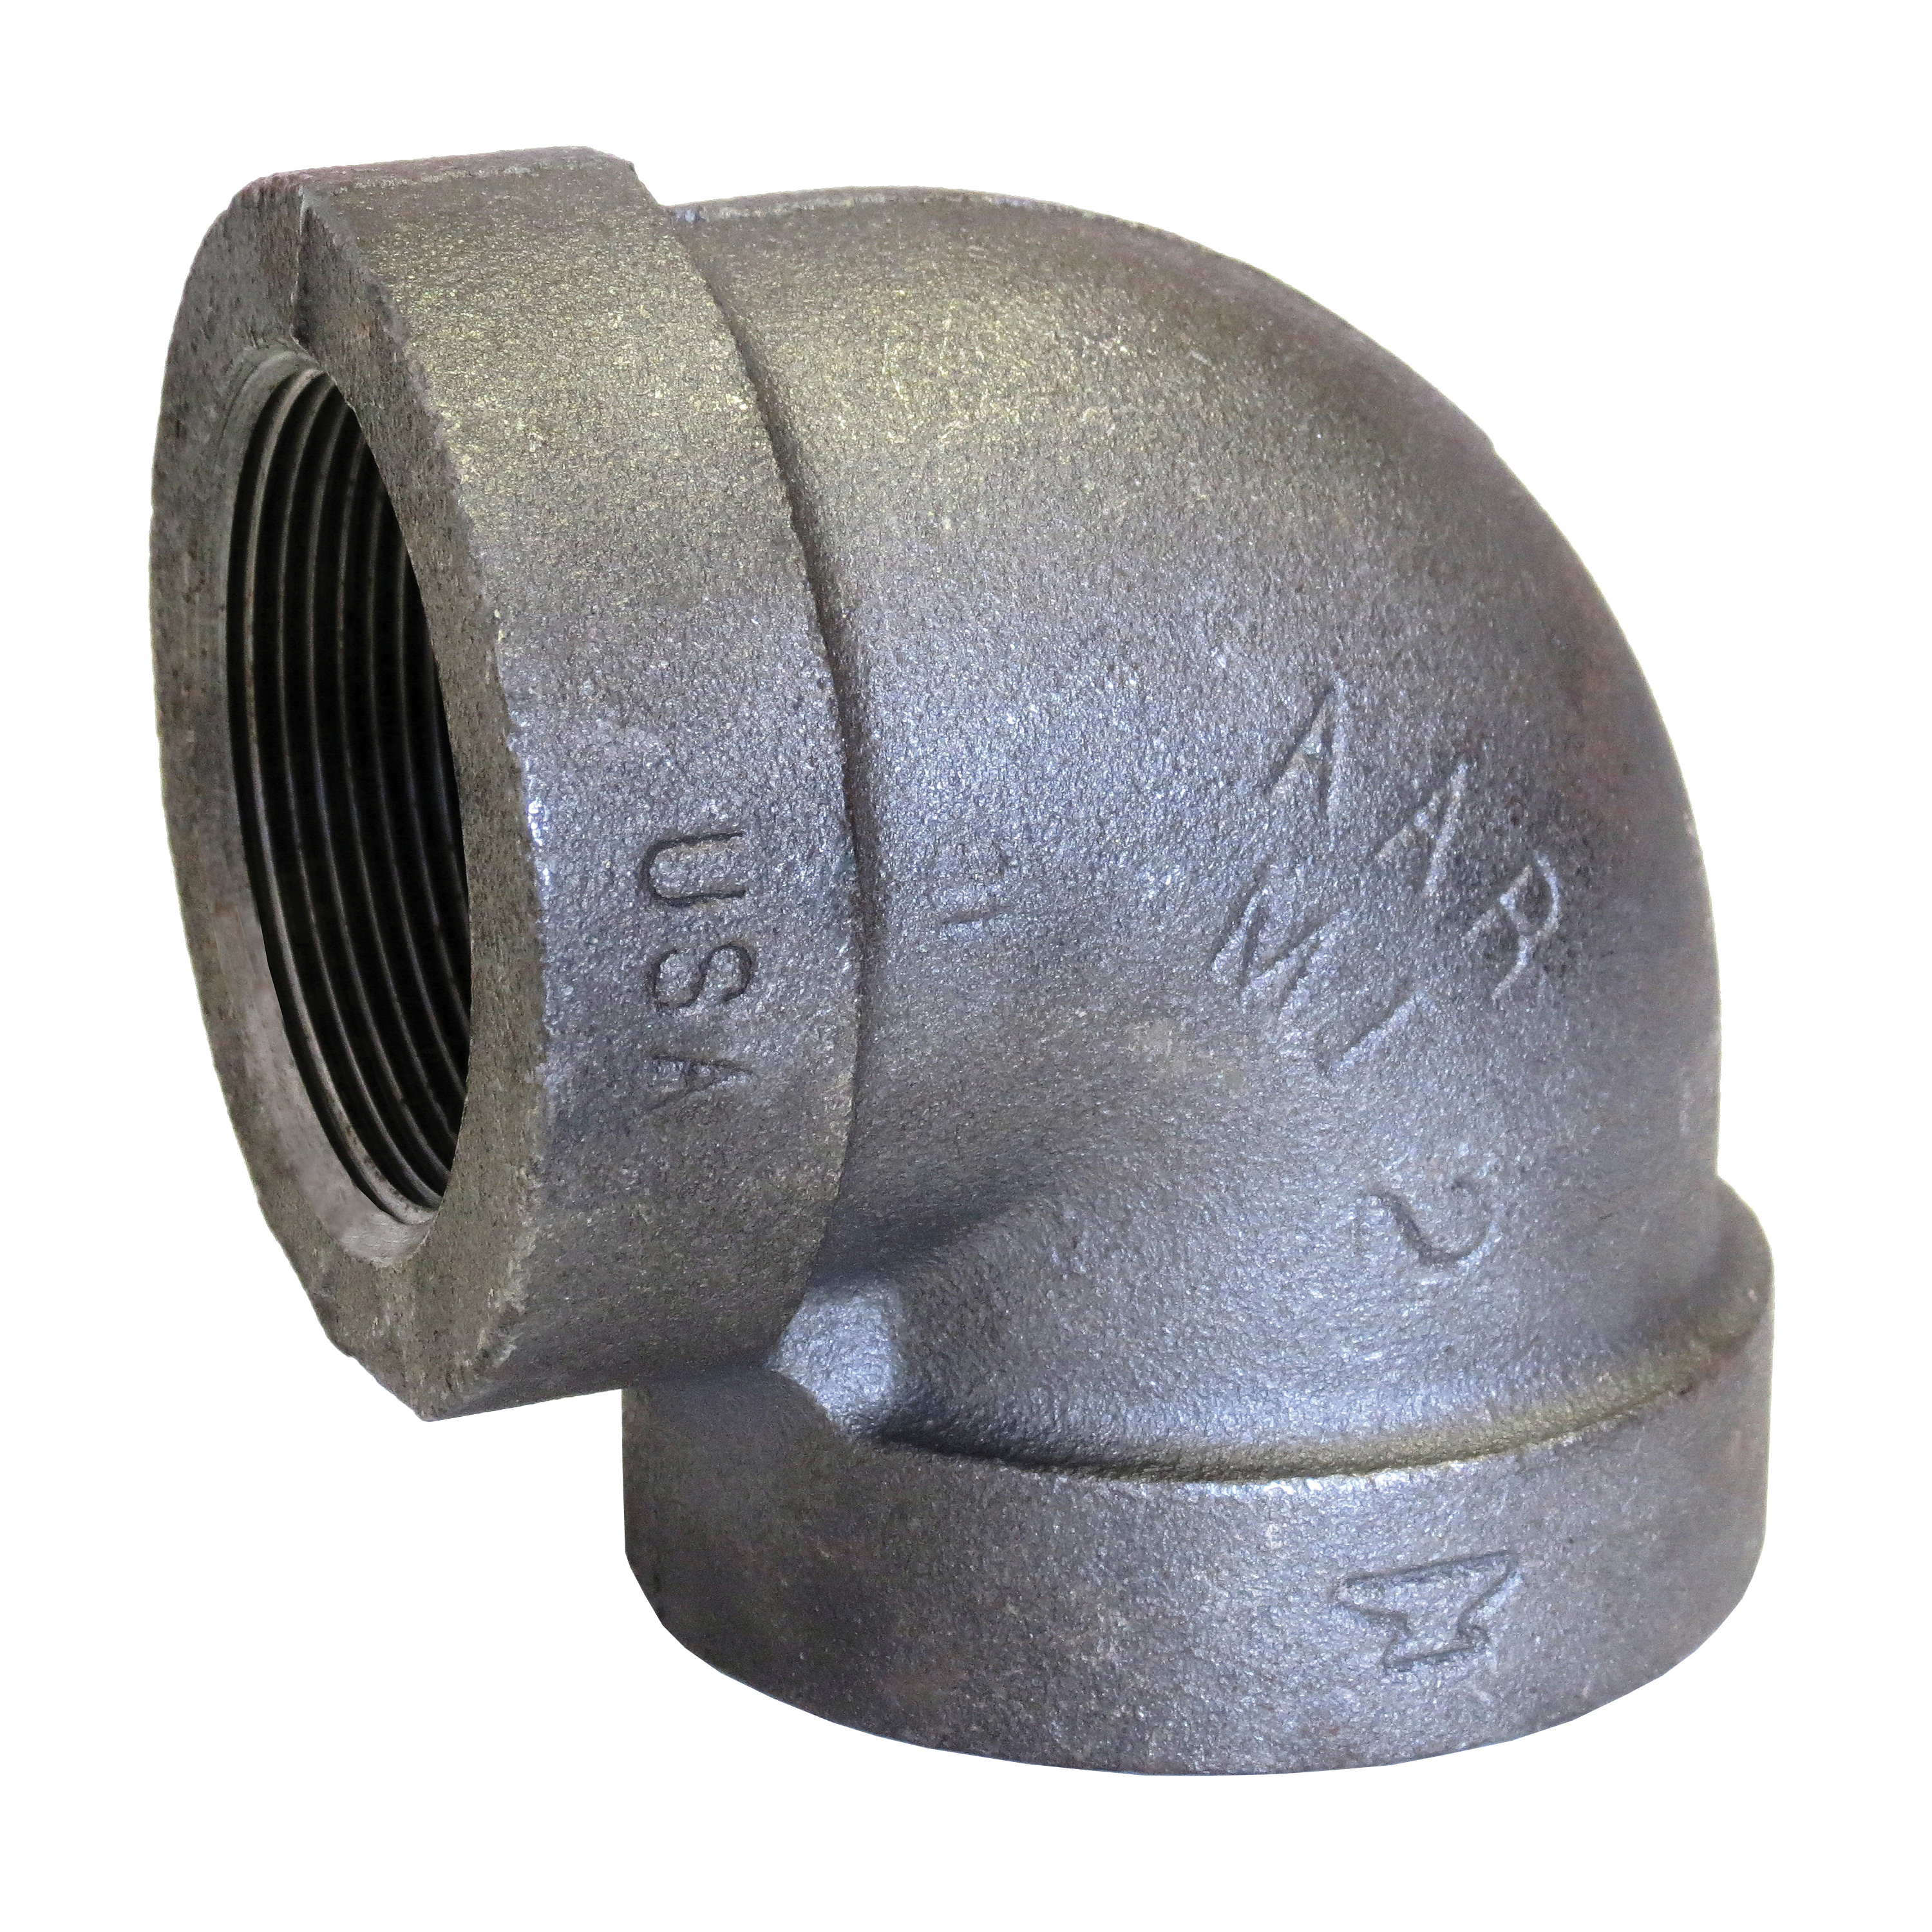 Anvil® 0310501408 FIG 1161 90 deg Straight Pipe Elbow, 1-1/2 in Nominal, FNPT End Style, 300 lb, Malleable Iron, Black Oxide, Domestic